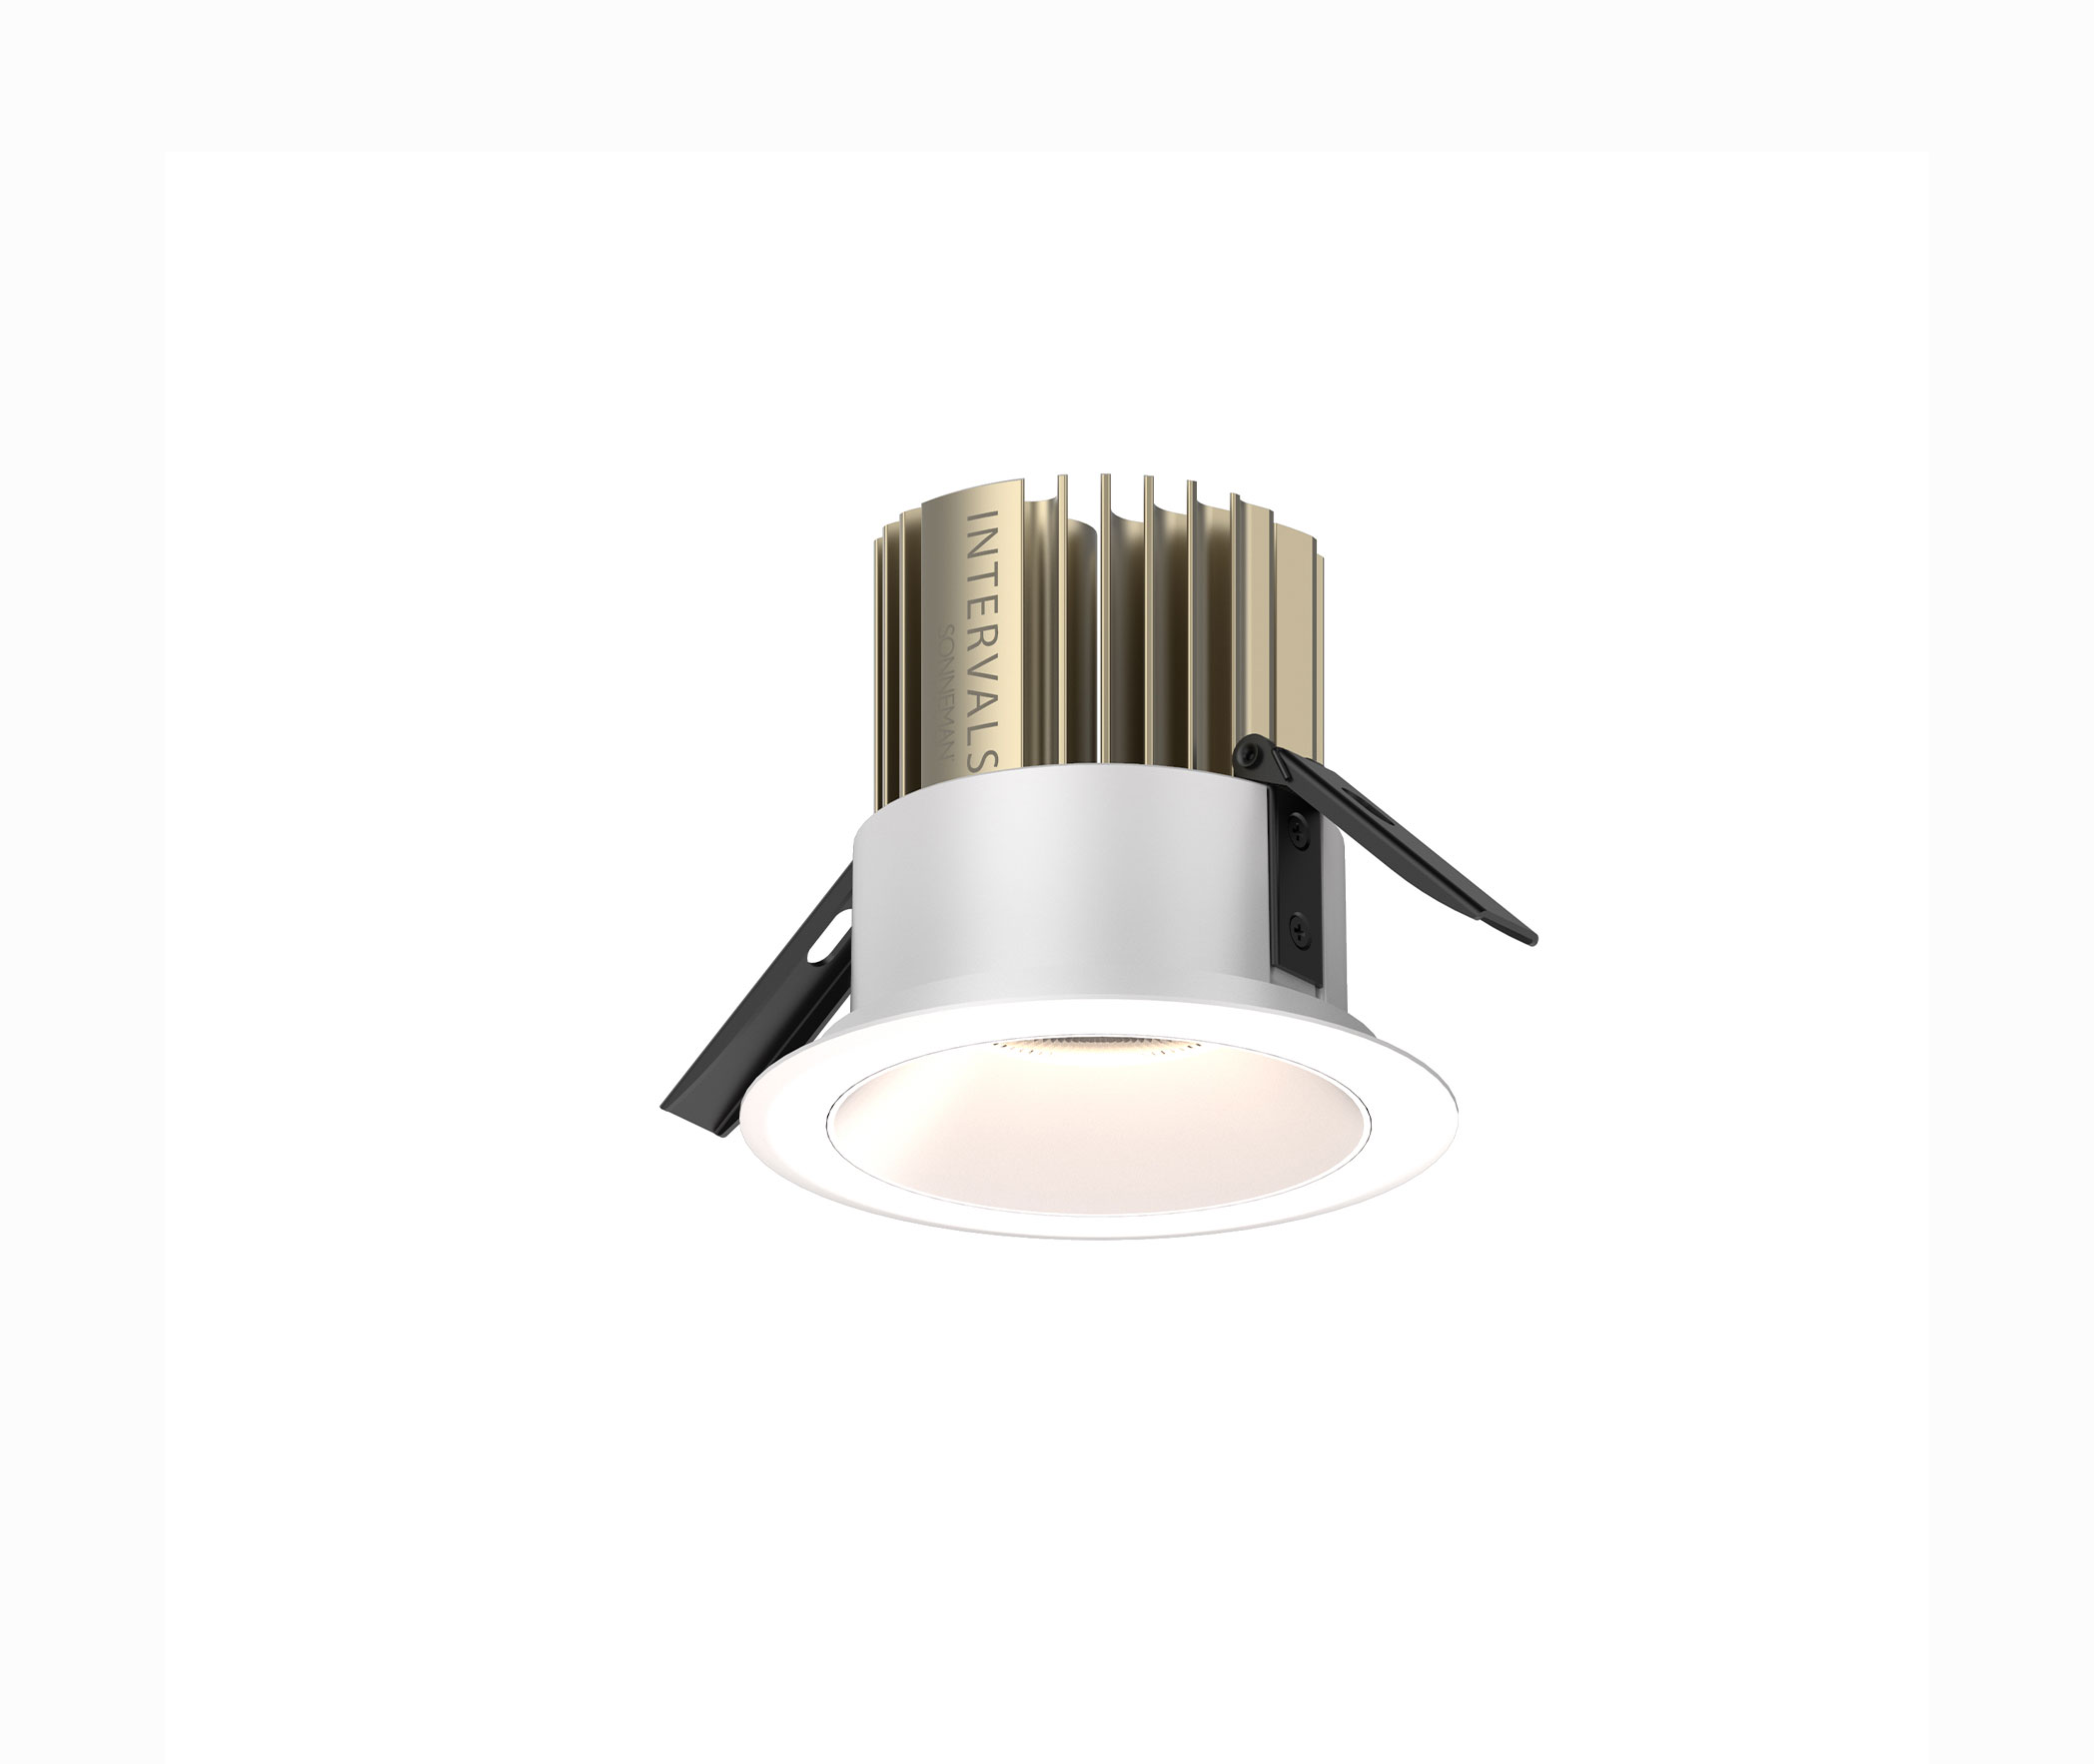 SONNEMAN_Intervals-Recessed-Downlights-Fixed-Round-Bevel-3_int_products